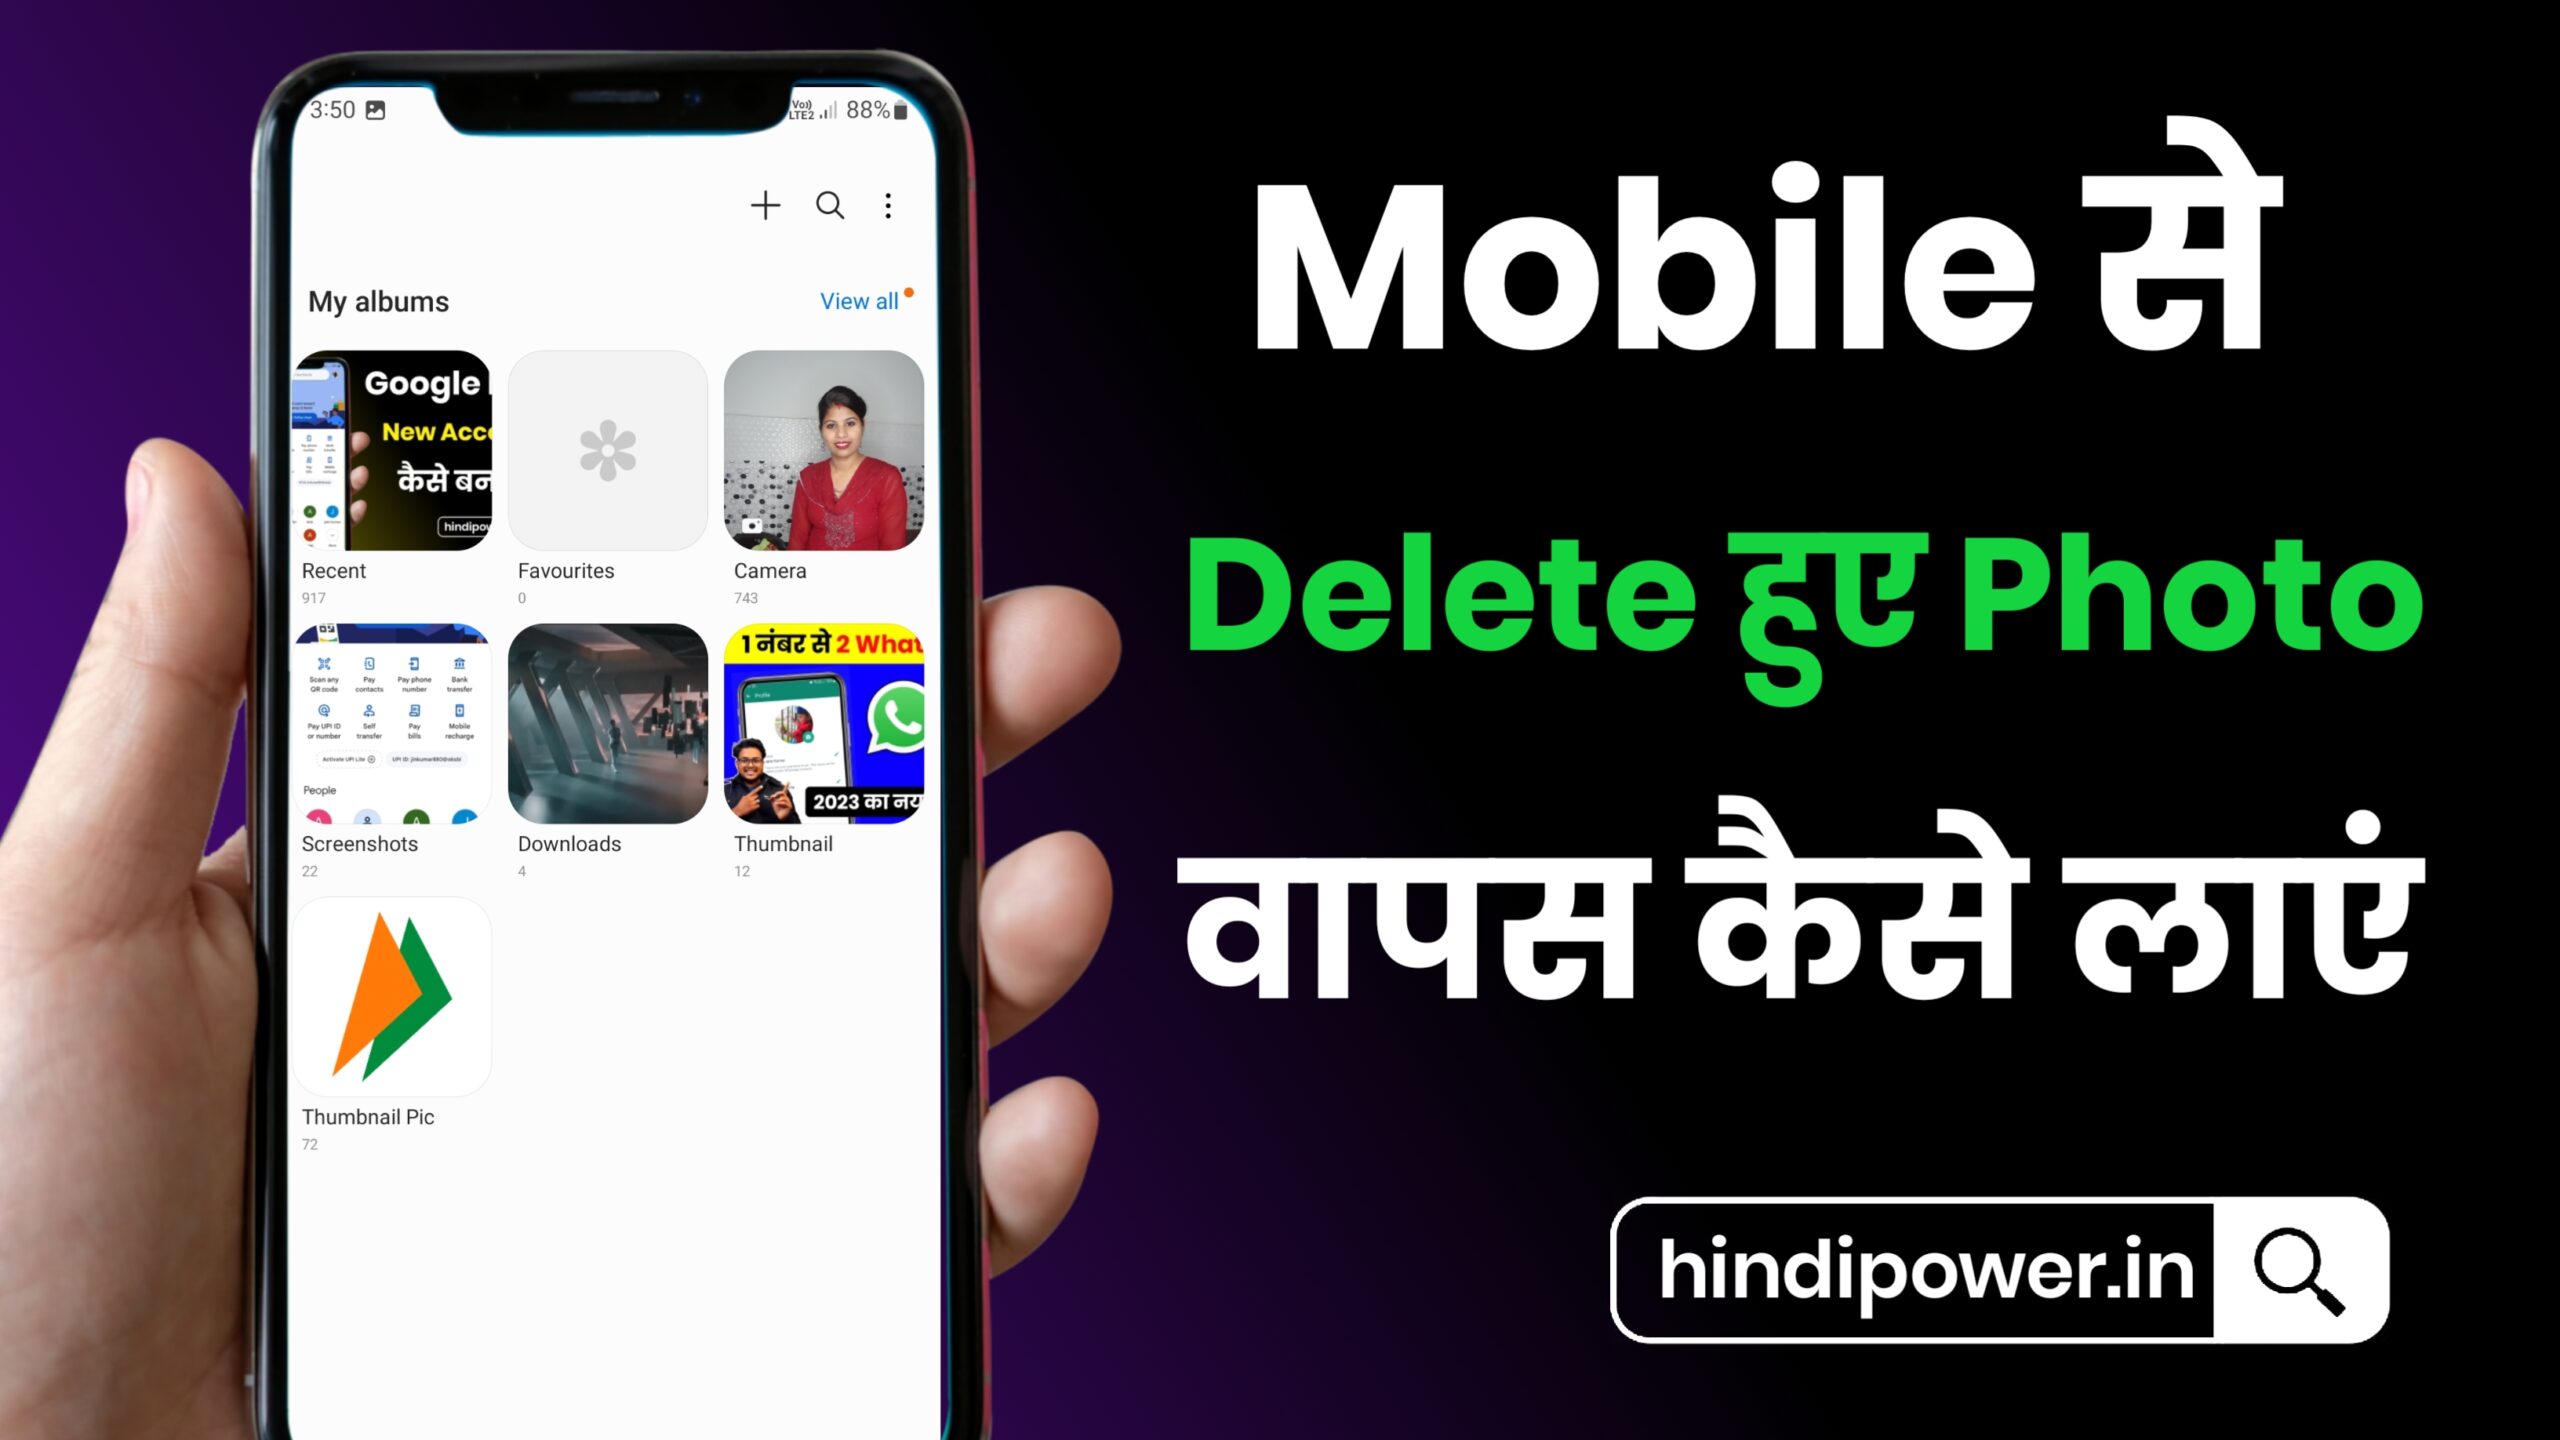 2023 How To Recover Deleted Photos In Android Mobile | मोबाइल से डिलीट फोटो रिकवर कैसे करें